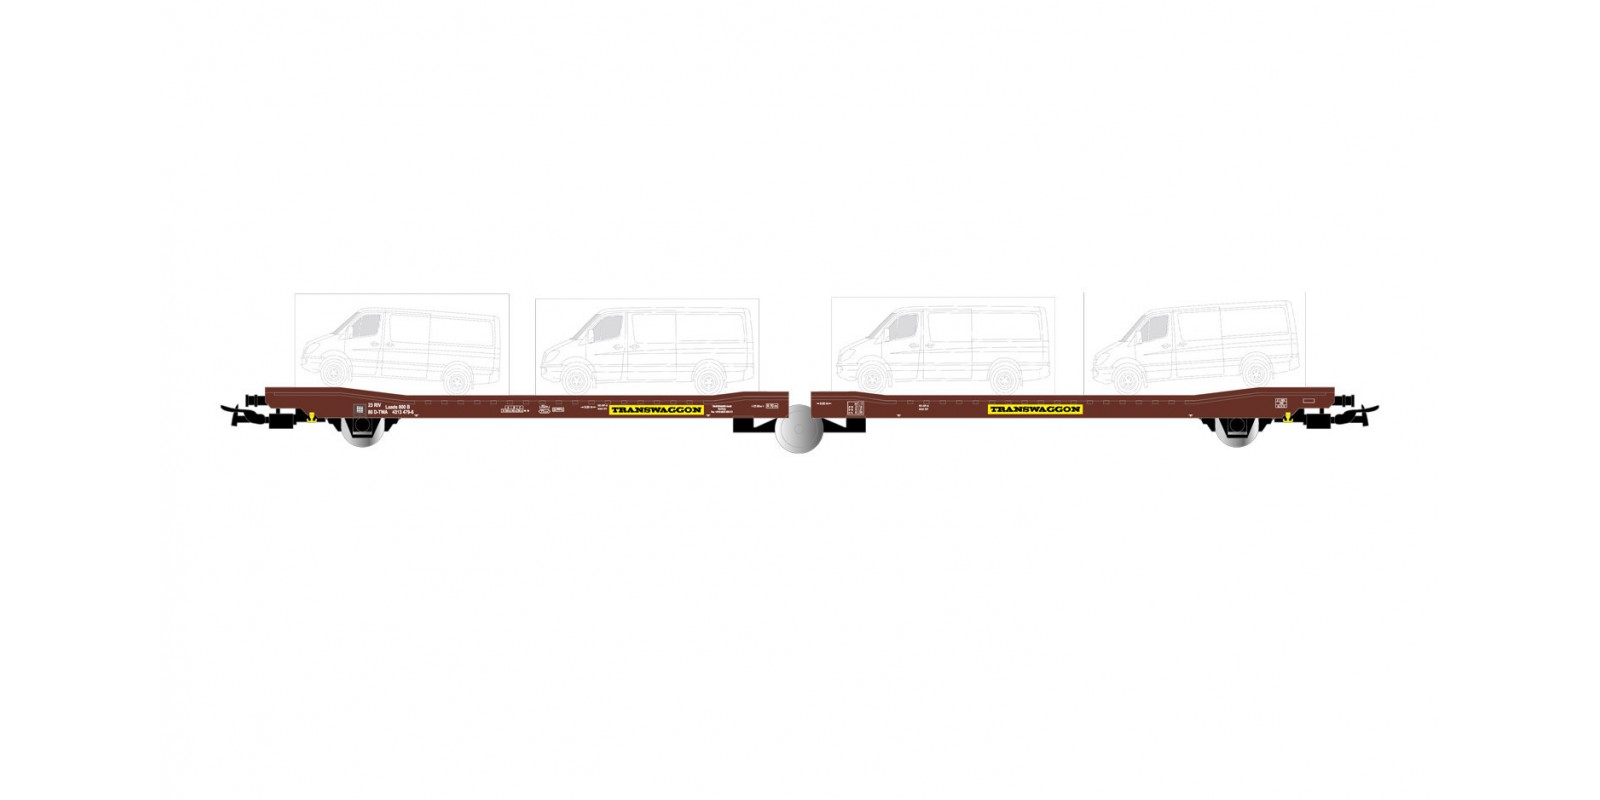 RI6501 Transwaggon, 3-axle flat wagon, brown livery, loaded with 4 Sprinter Vans, period V-VI